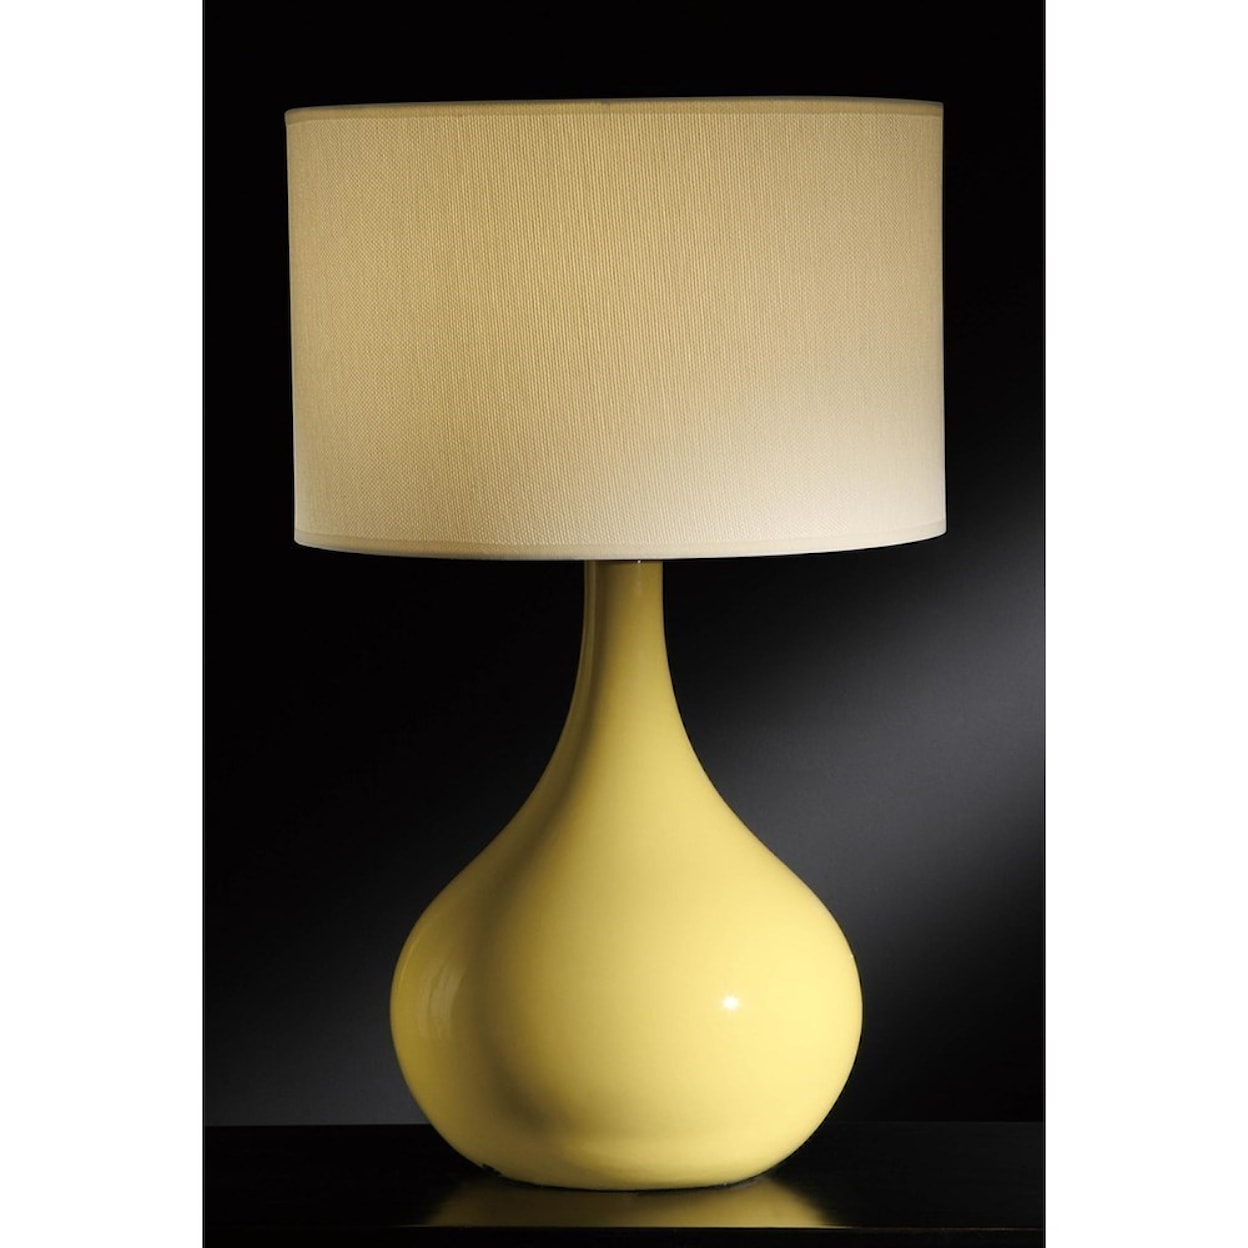 Crestview Collection Lighting Cabot Yellow Table Lamp